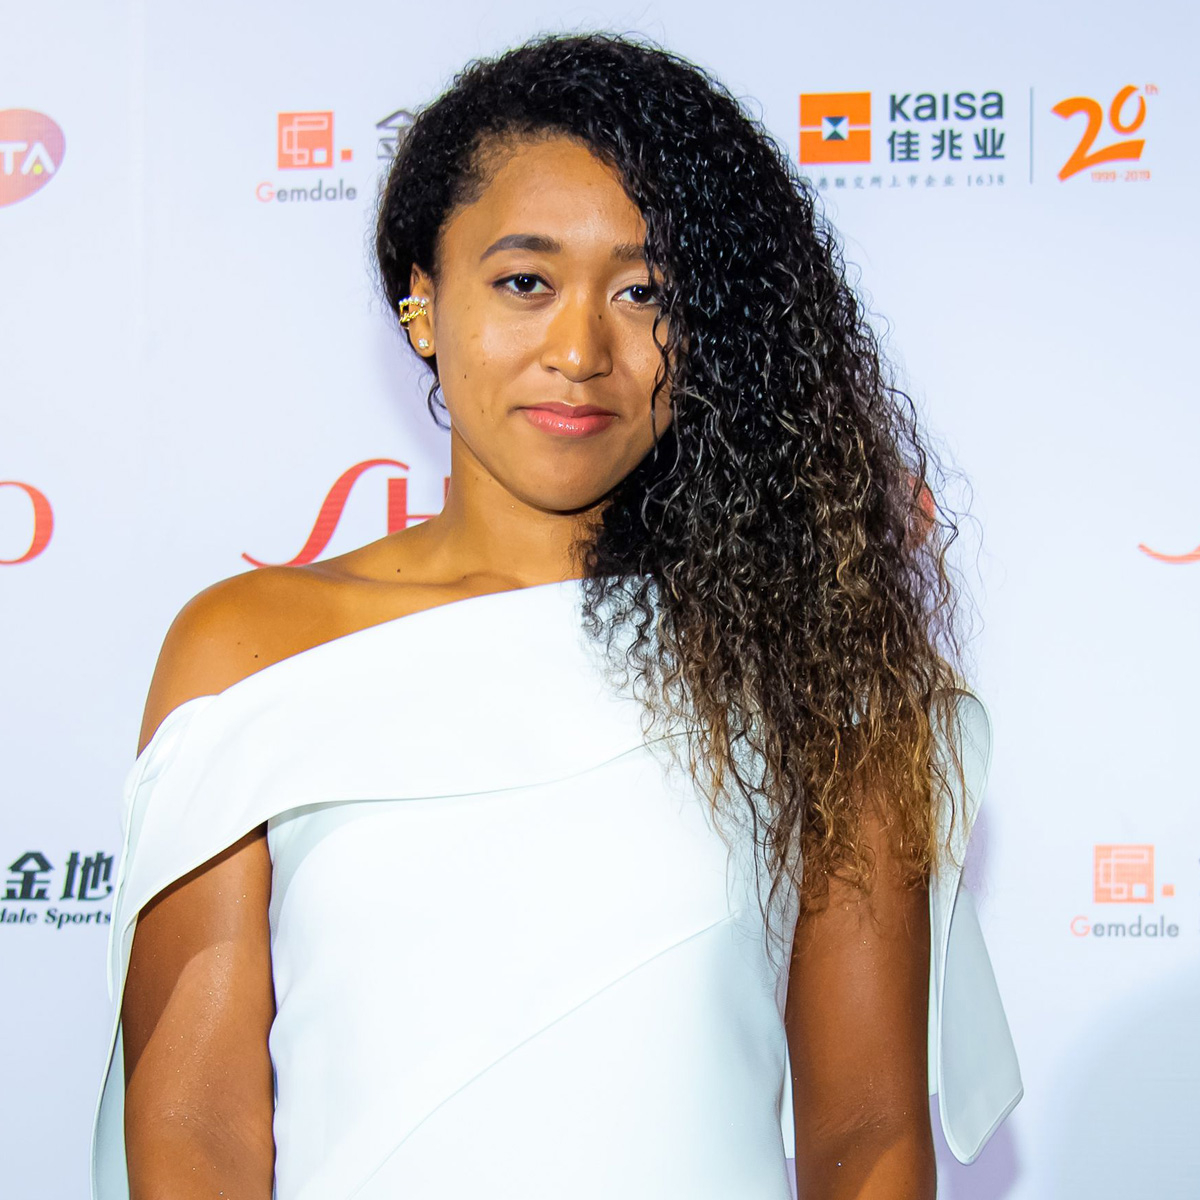 How Naomi Osaka selects her game-day outfits